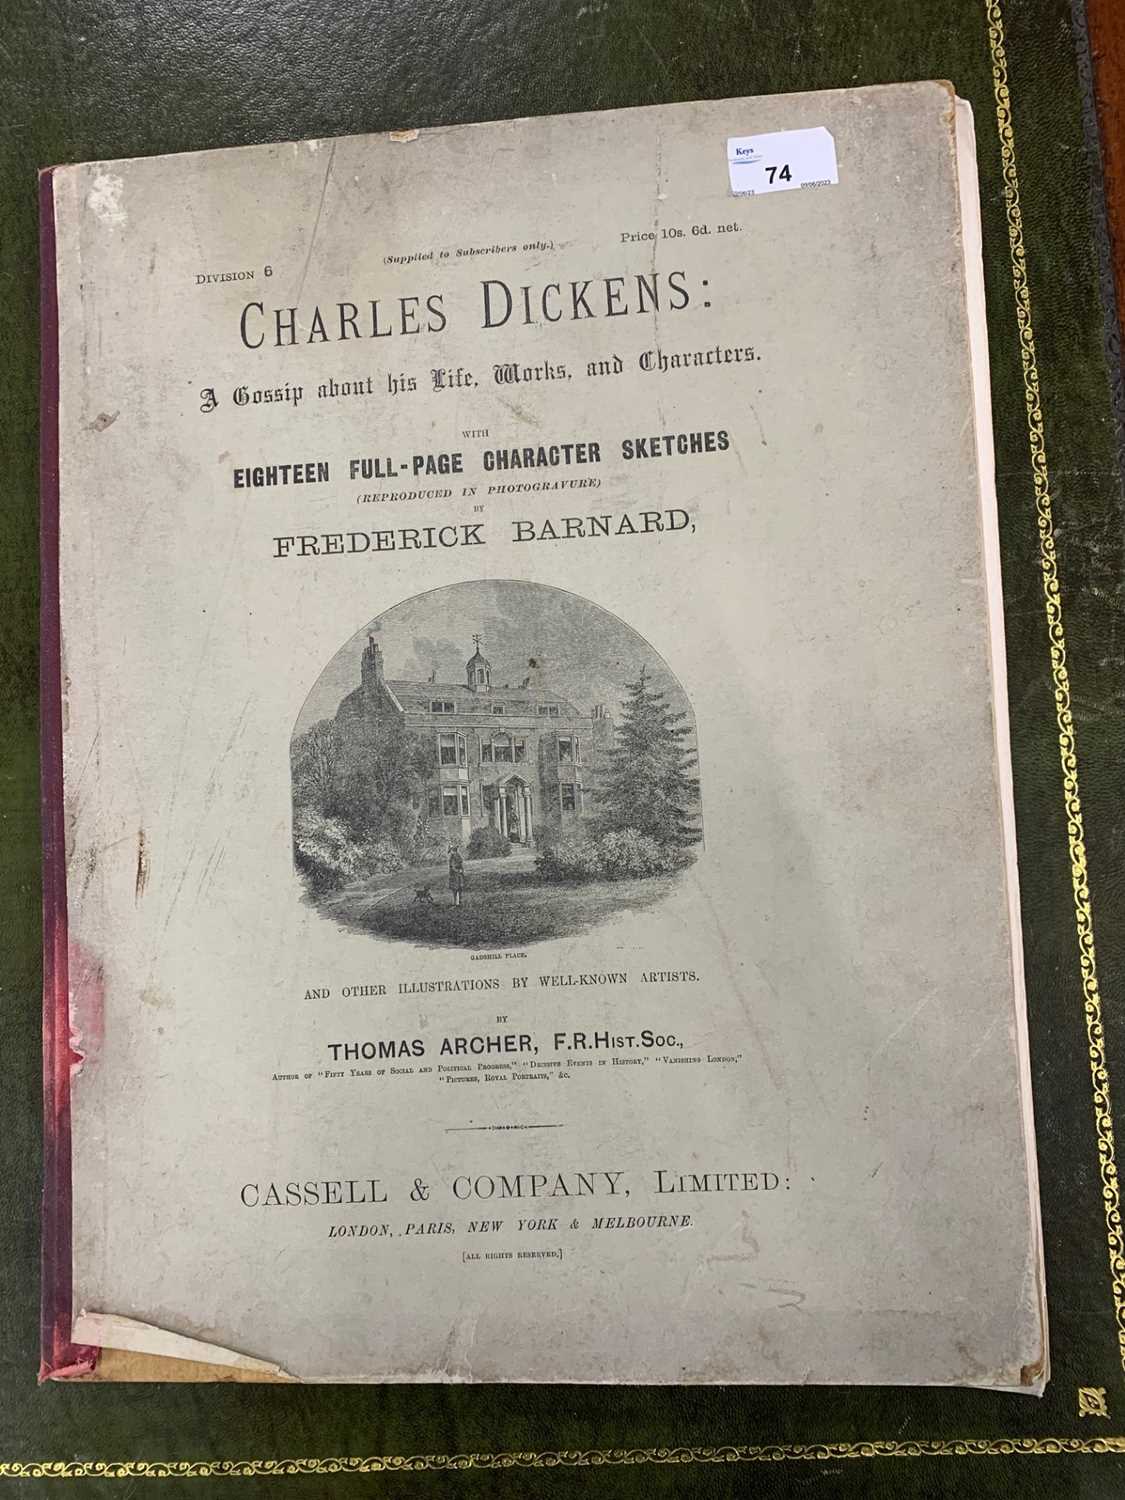 Charles Dickens: A Gossip about his Life, Works, and Characters. With eighteen full-page character - Image 7 of 10